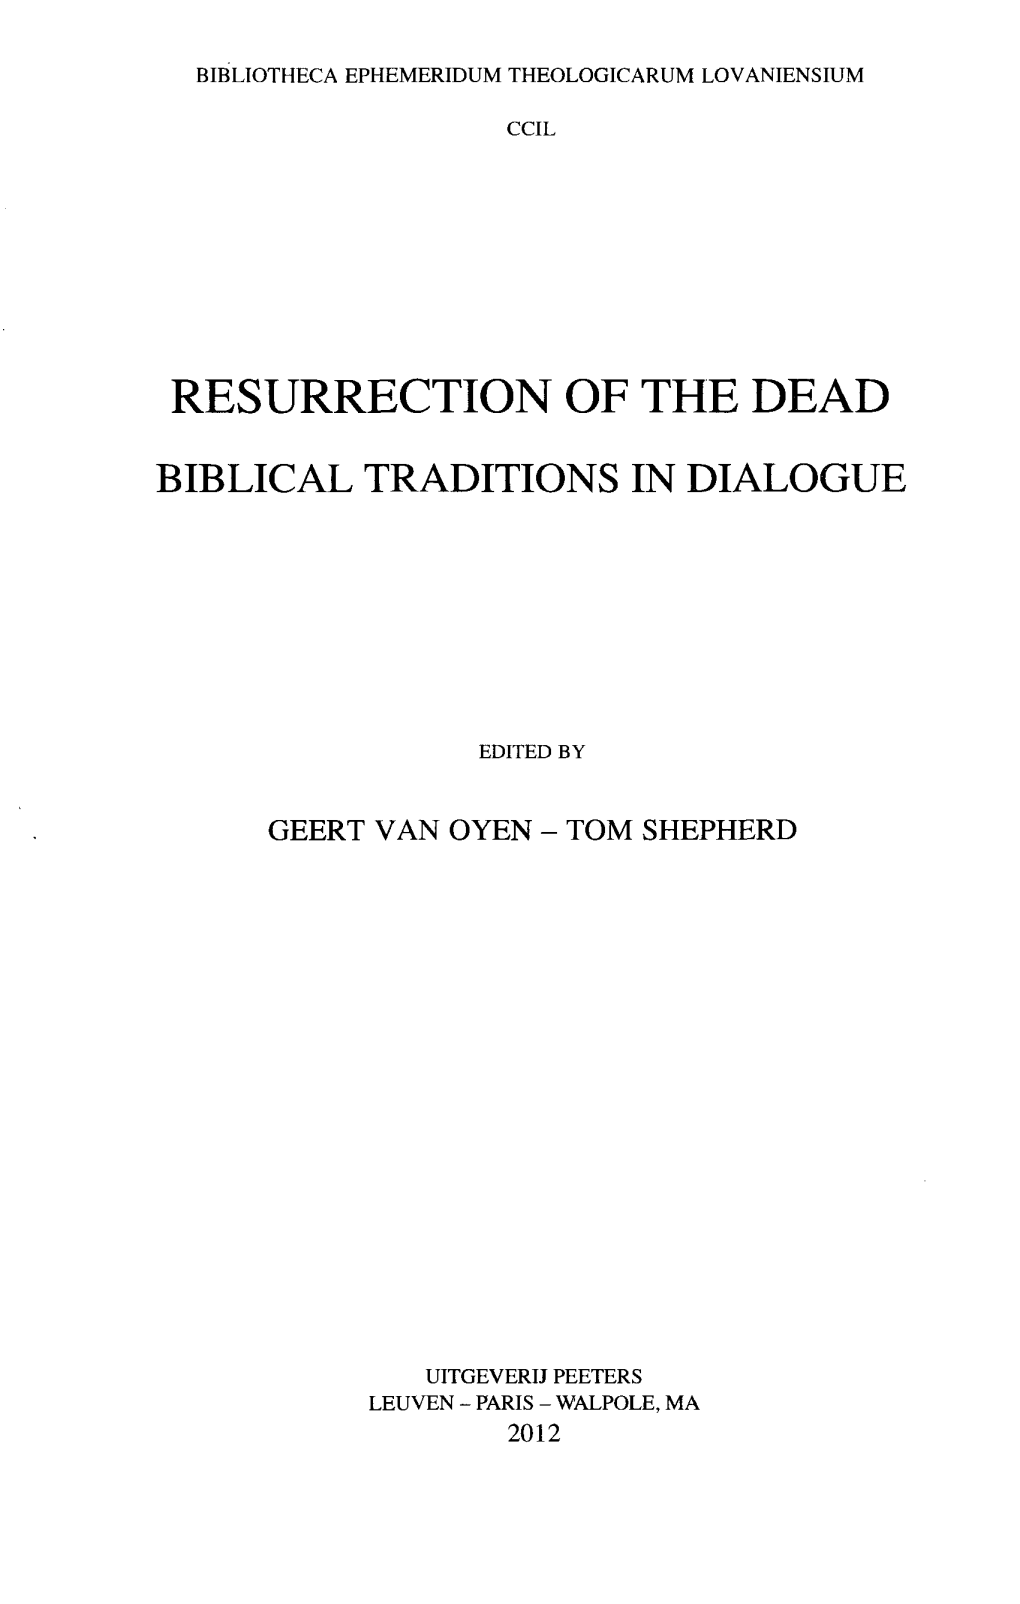 Resurrection of the Dead Biblical Traditions in Dialogue